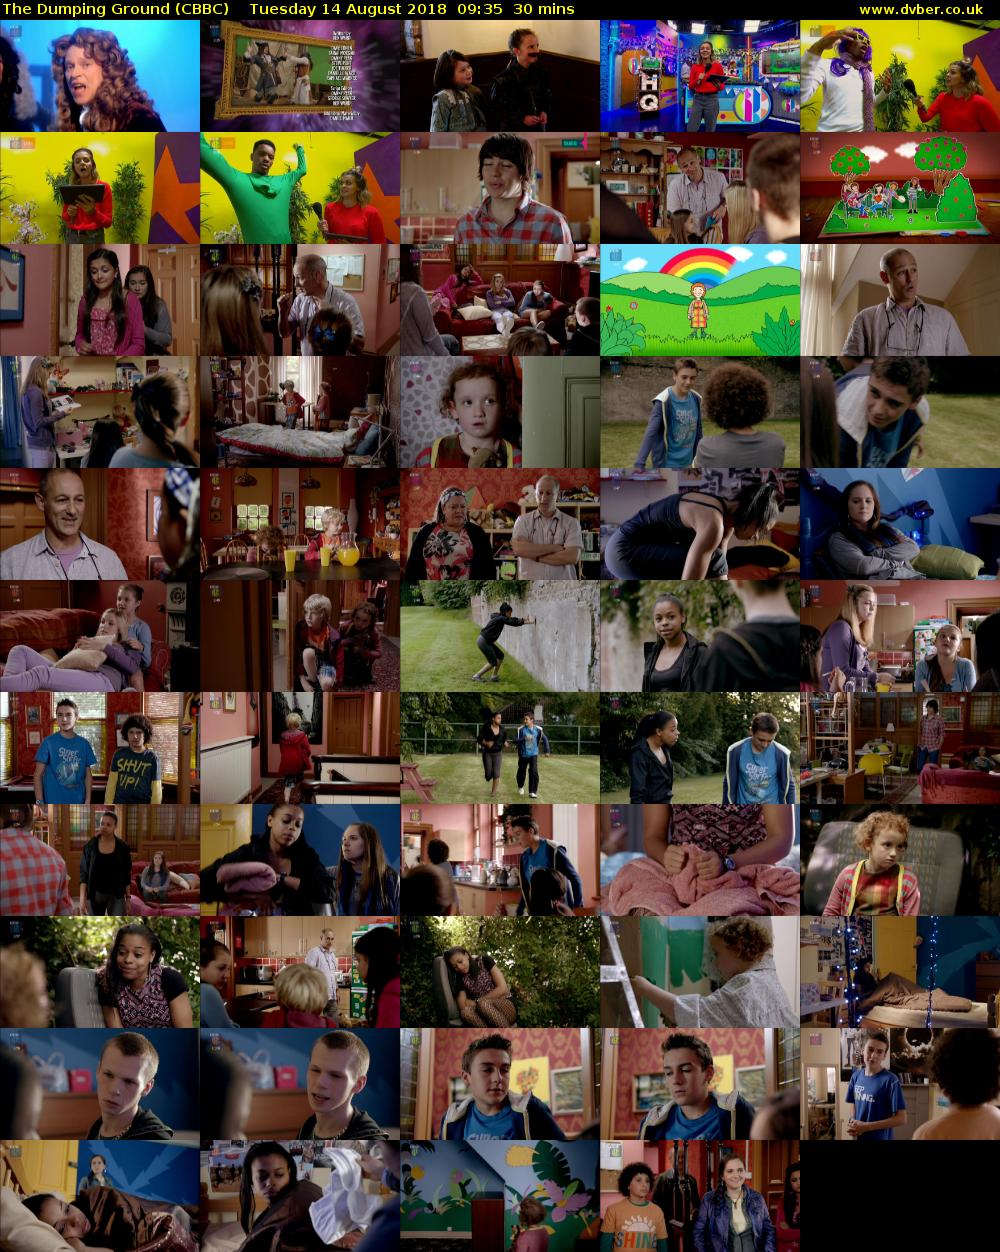 The Dumping Ground (CBBC) Tuesday 14 August 2018 09:35 - 10:05